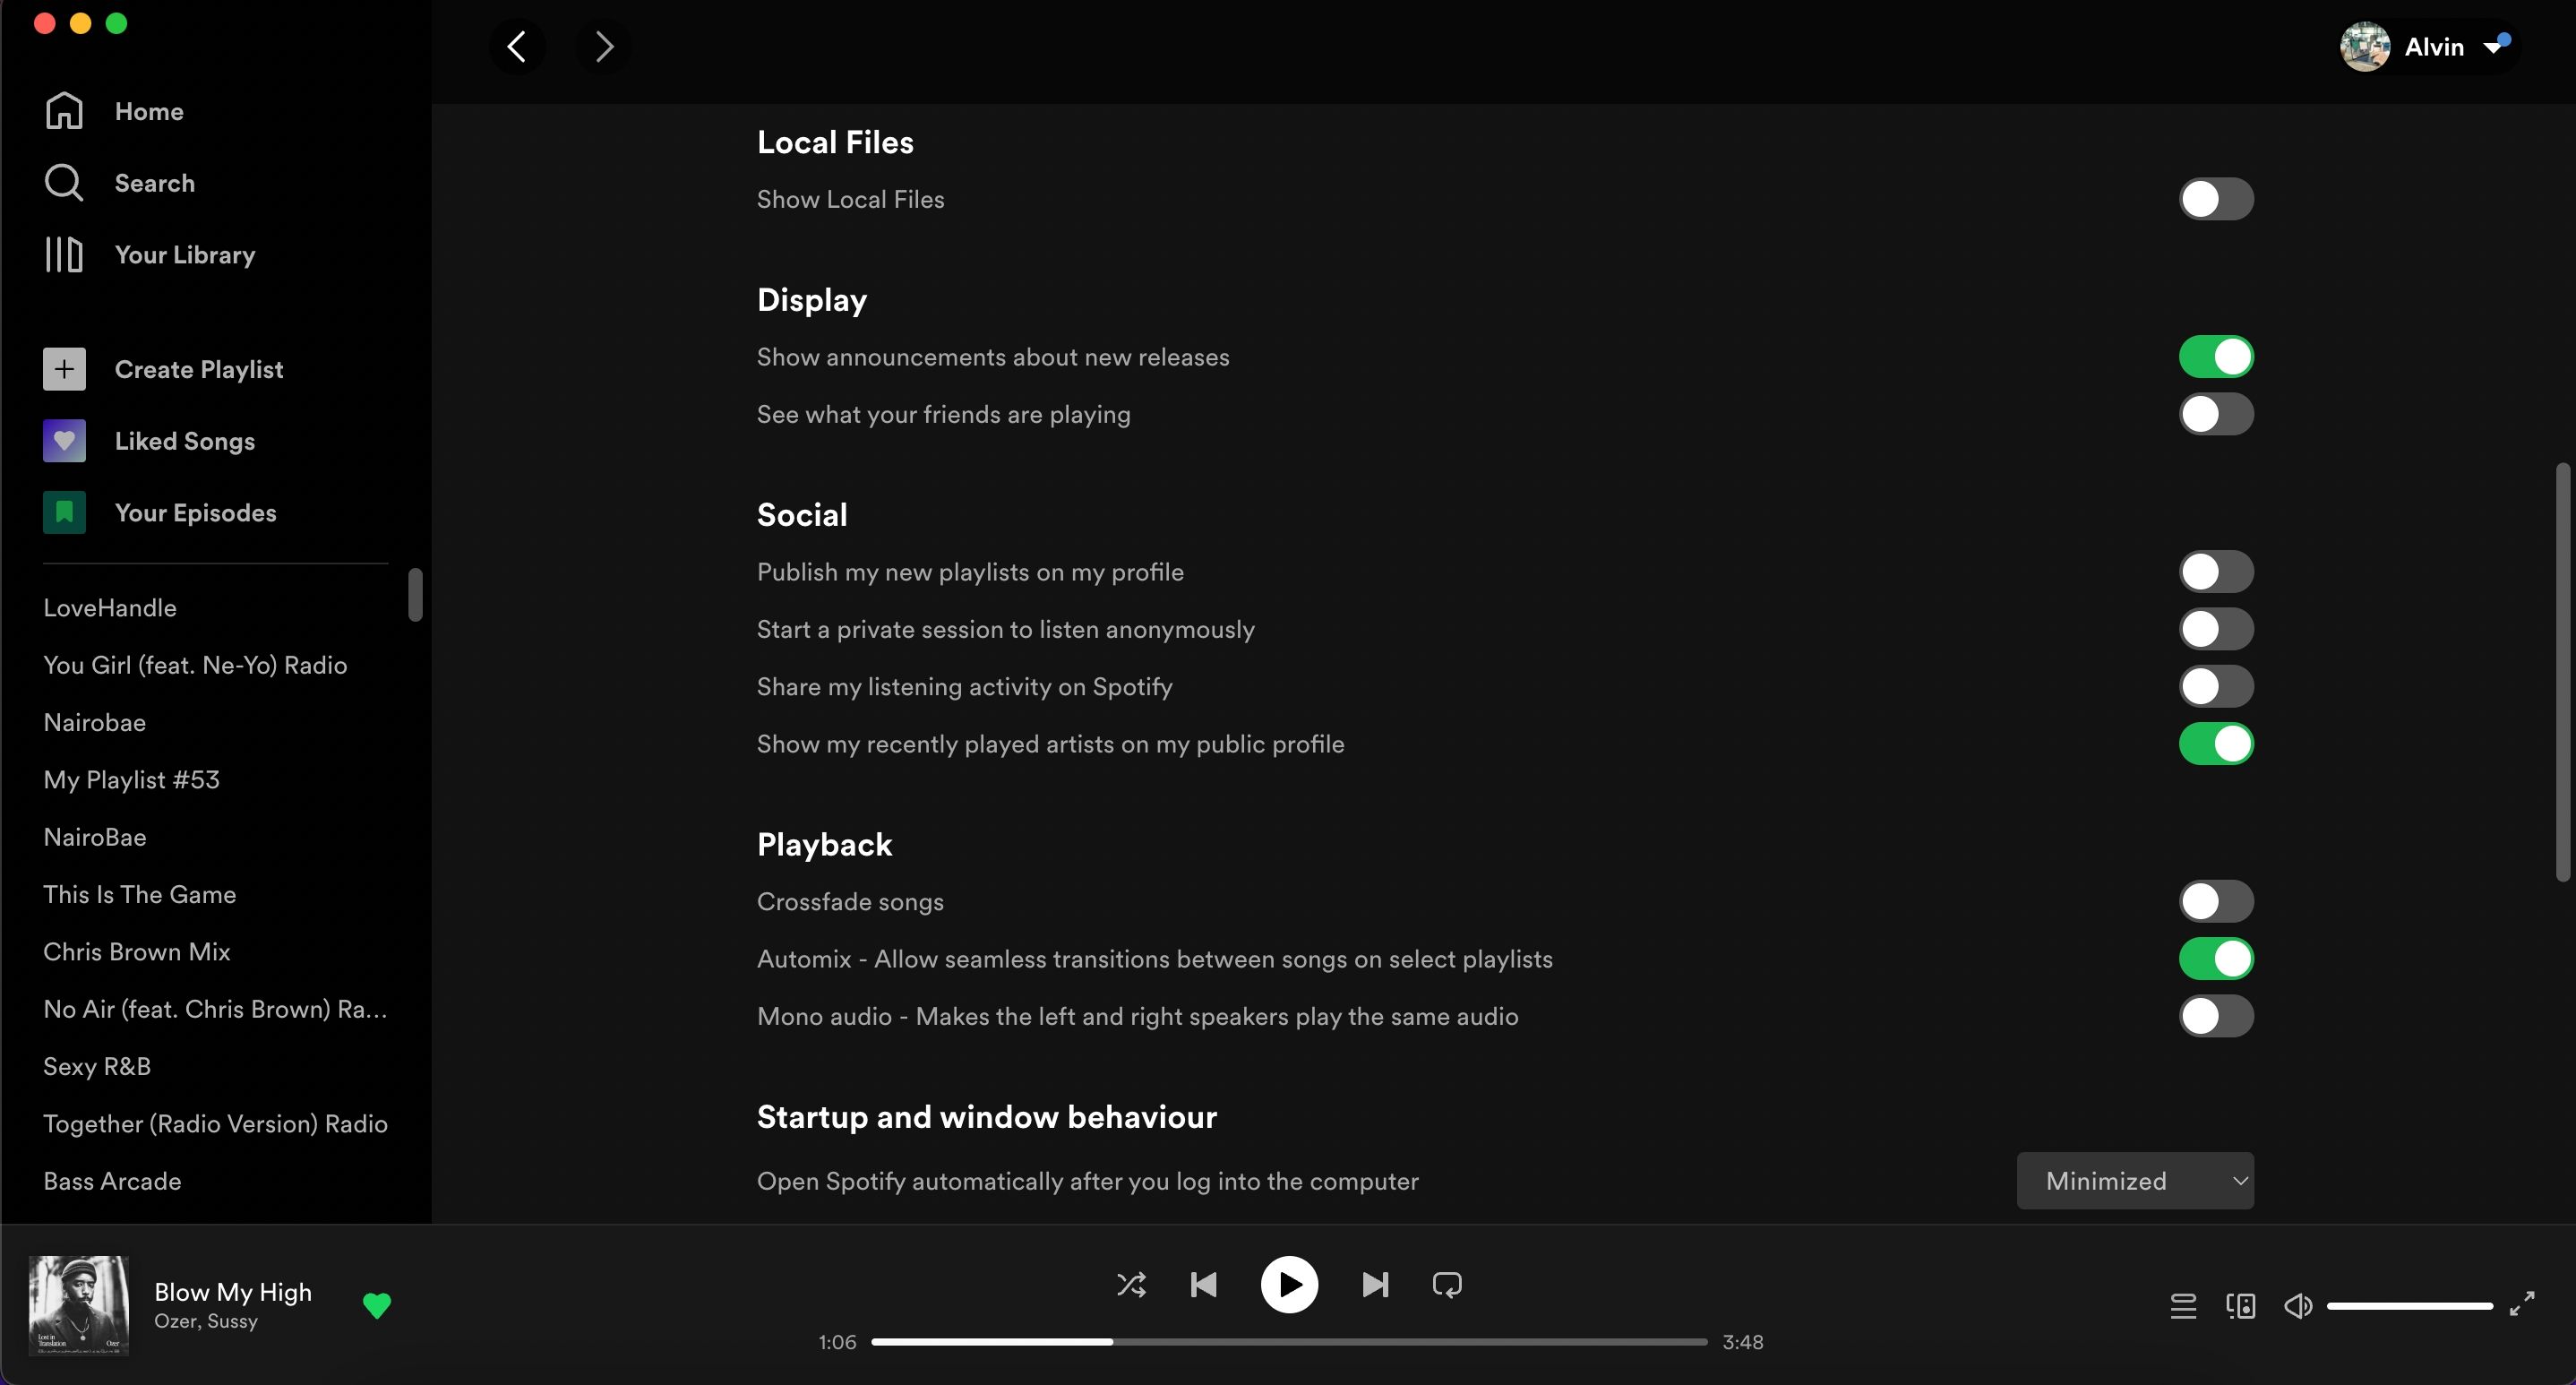 Sharing Spotify listening activity disabled